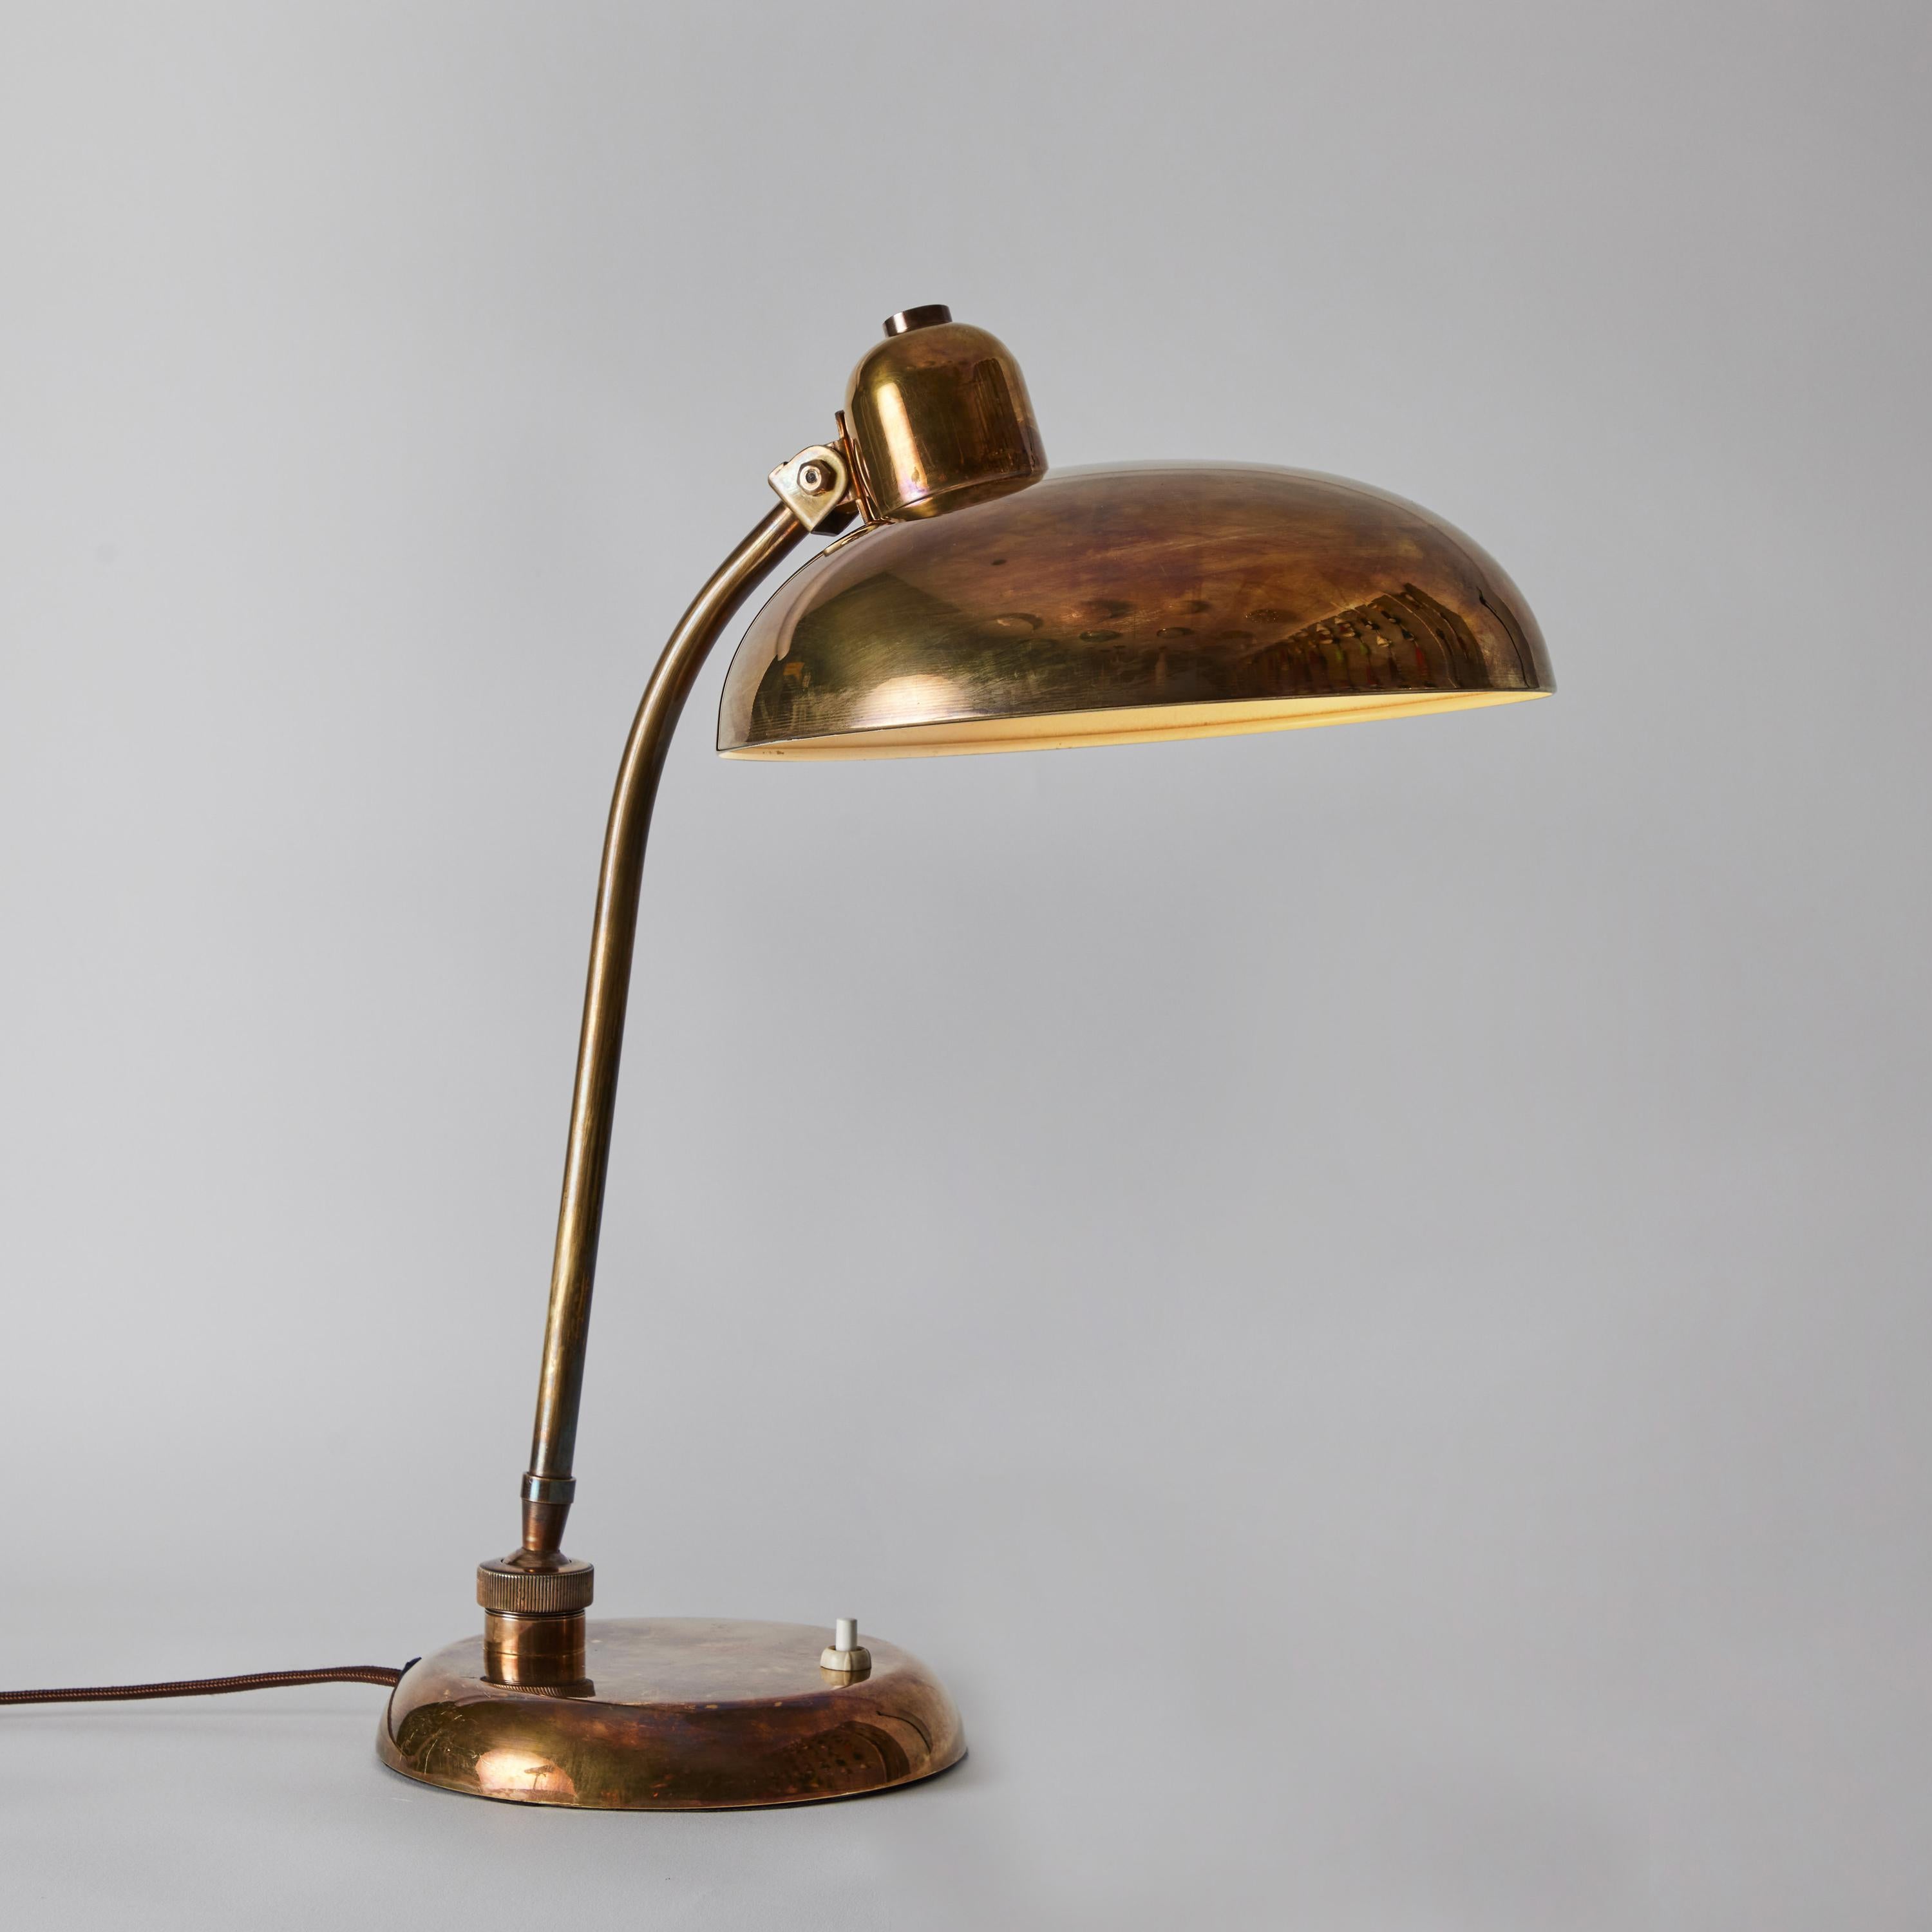 Mid-20th Century 1940s Giovanni Michelucci Patinated Brass Ministerial Table Lamp for Lariolux